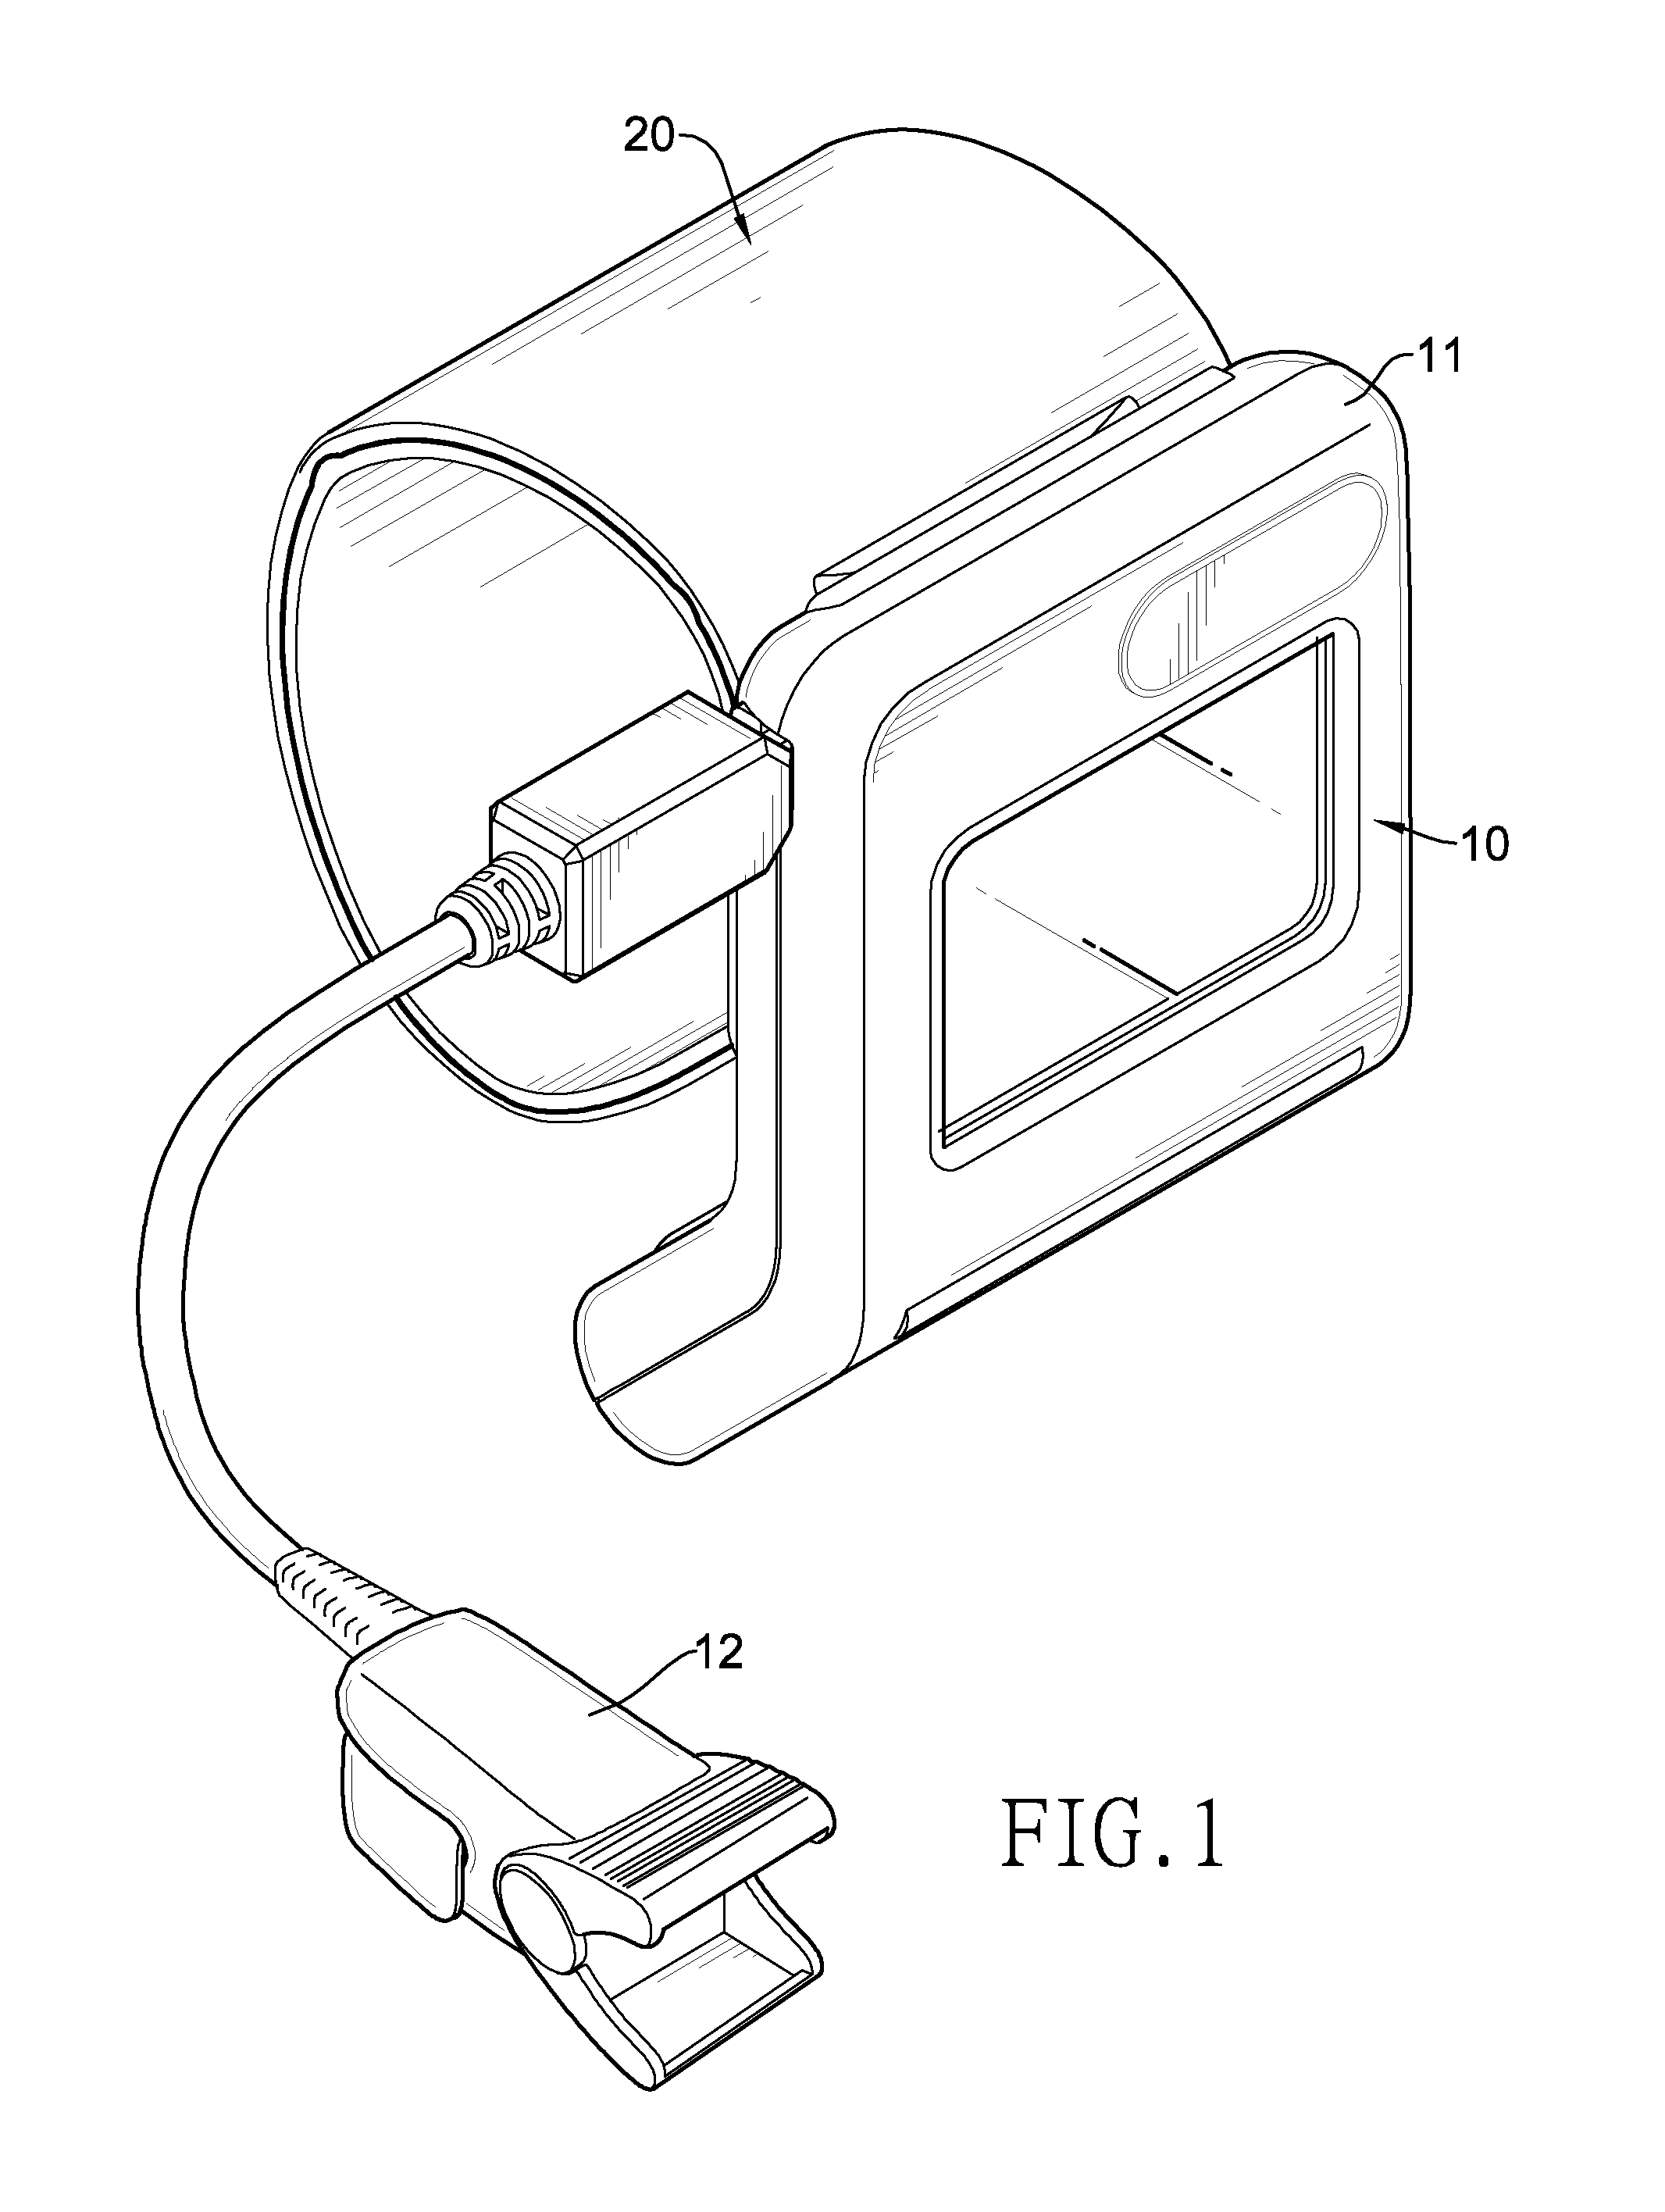 Portable medical device